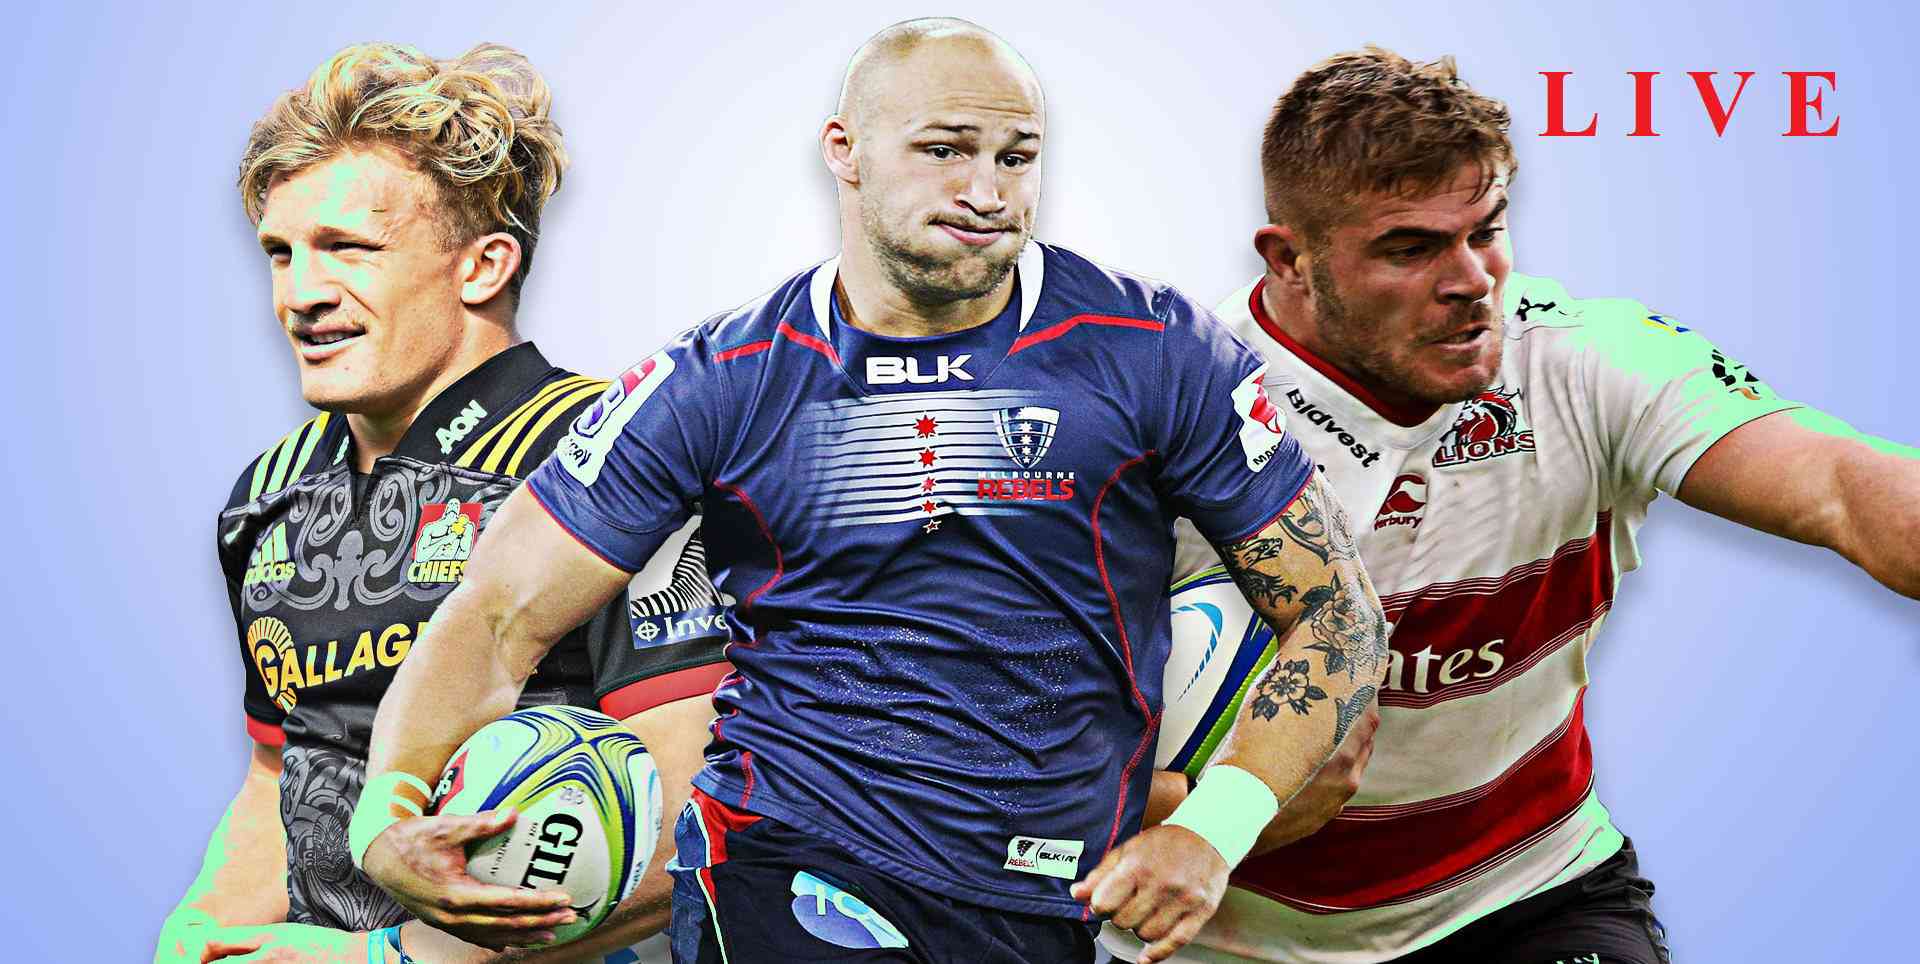 live-exeter-vs-gloucester-rugby-streaming